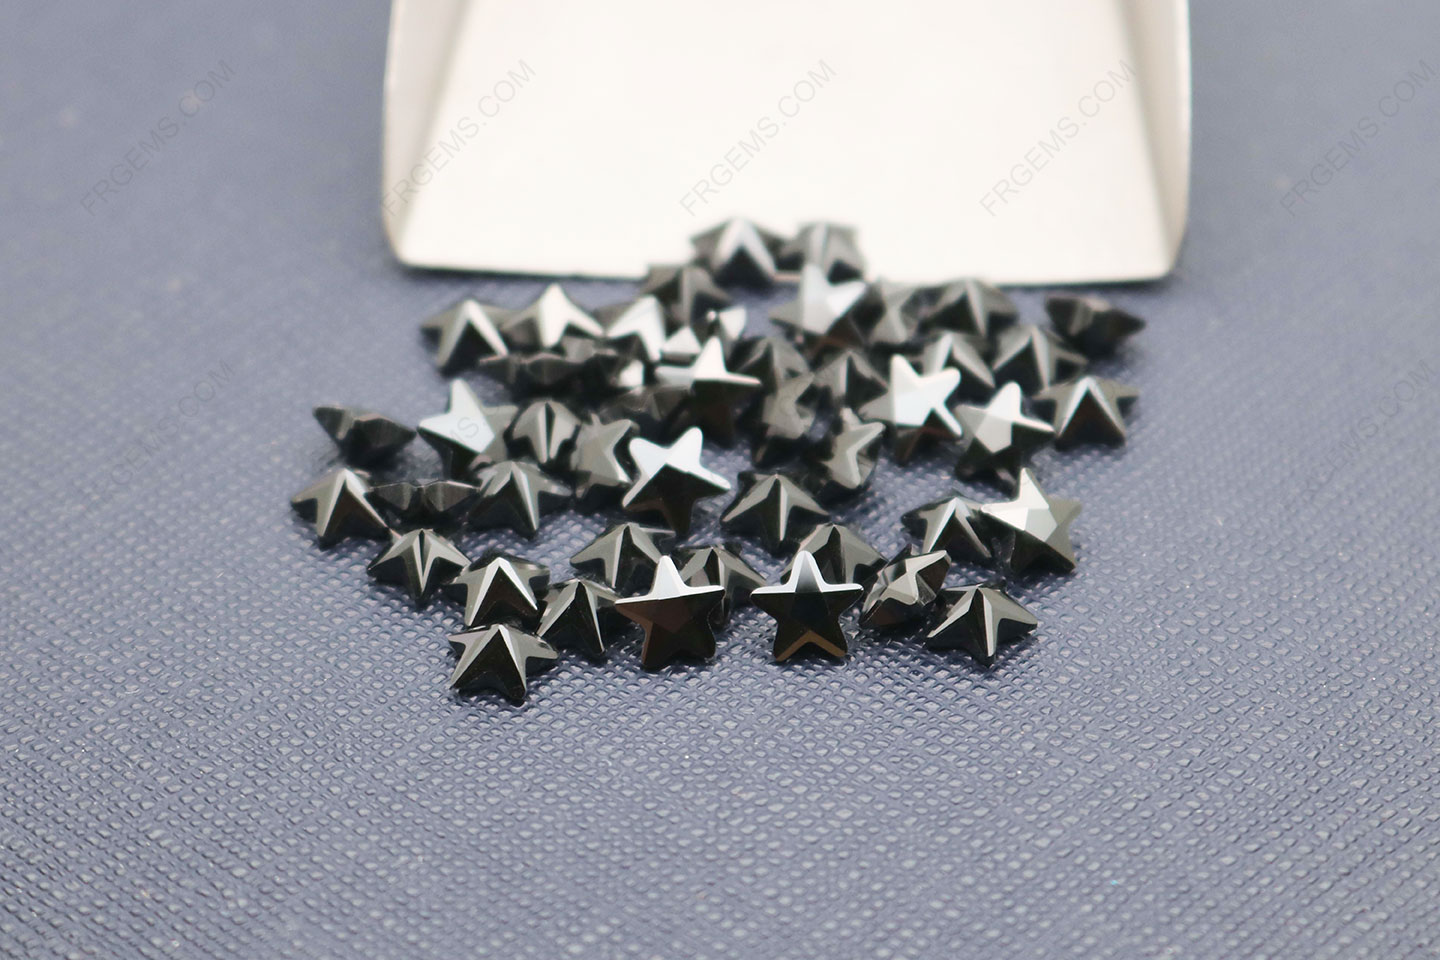 Loose Cubic Zirconia Black Color Five Point Star Faceted Cut 6x6mm gemstones wholesale